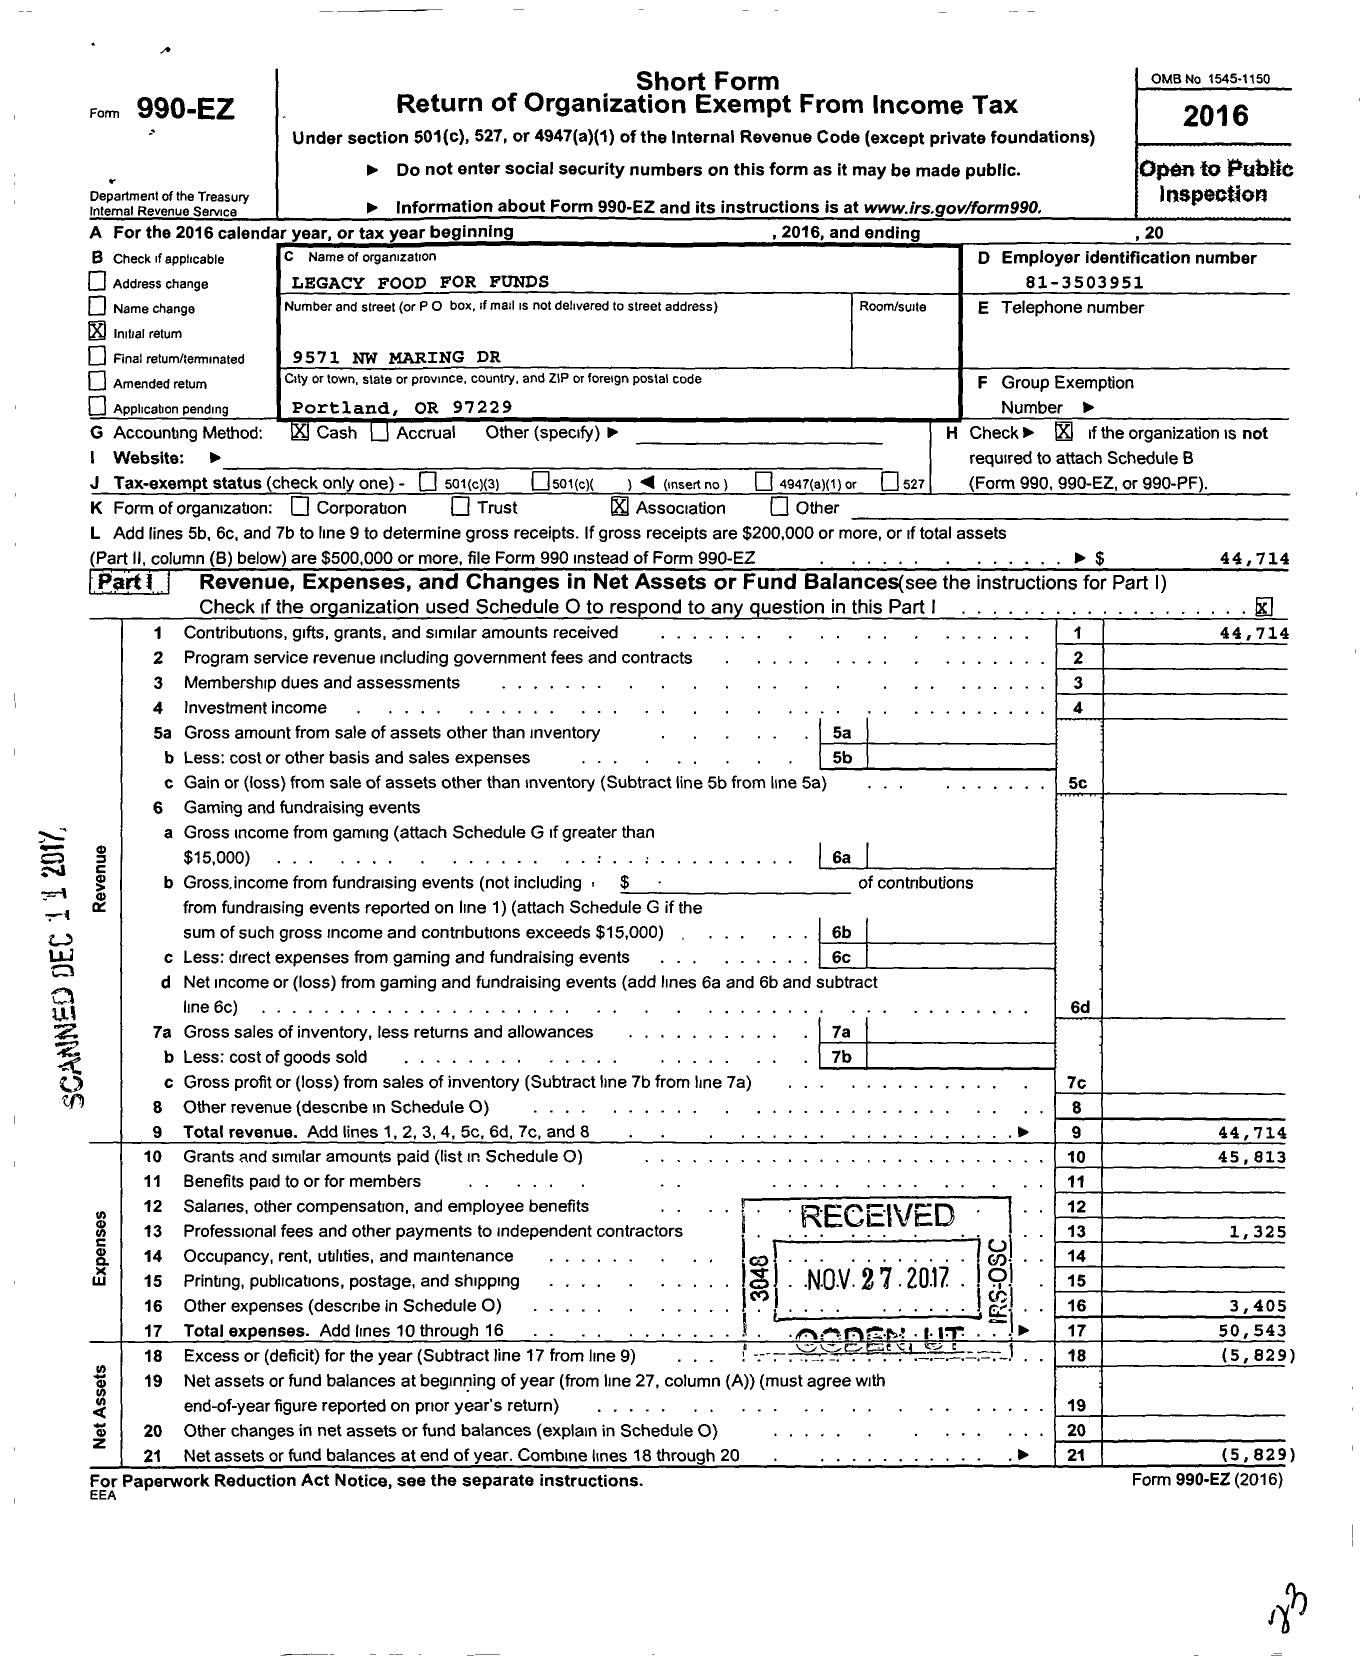 Image of first page of 2016 Form 990EO for Legacy Food for Funds